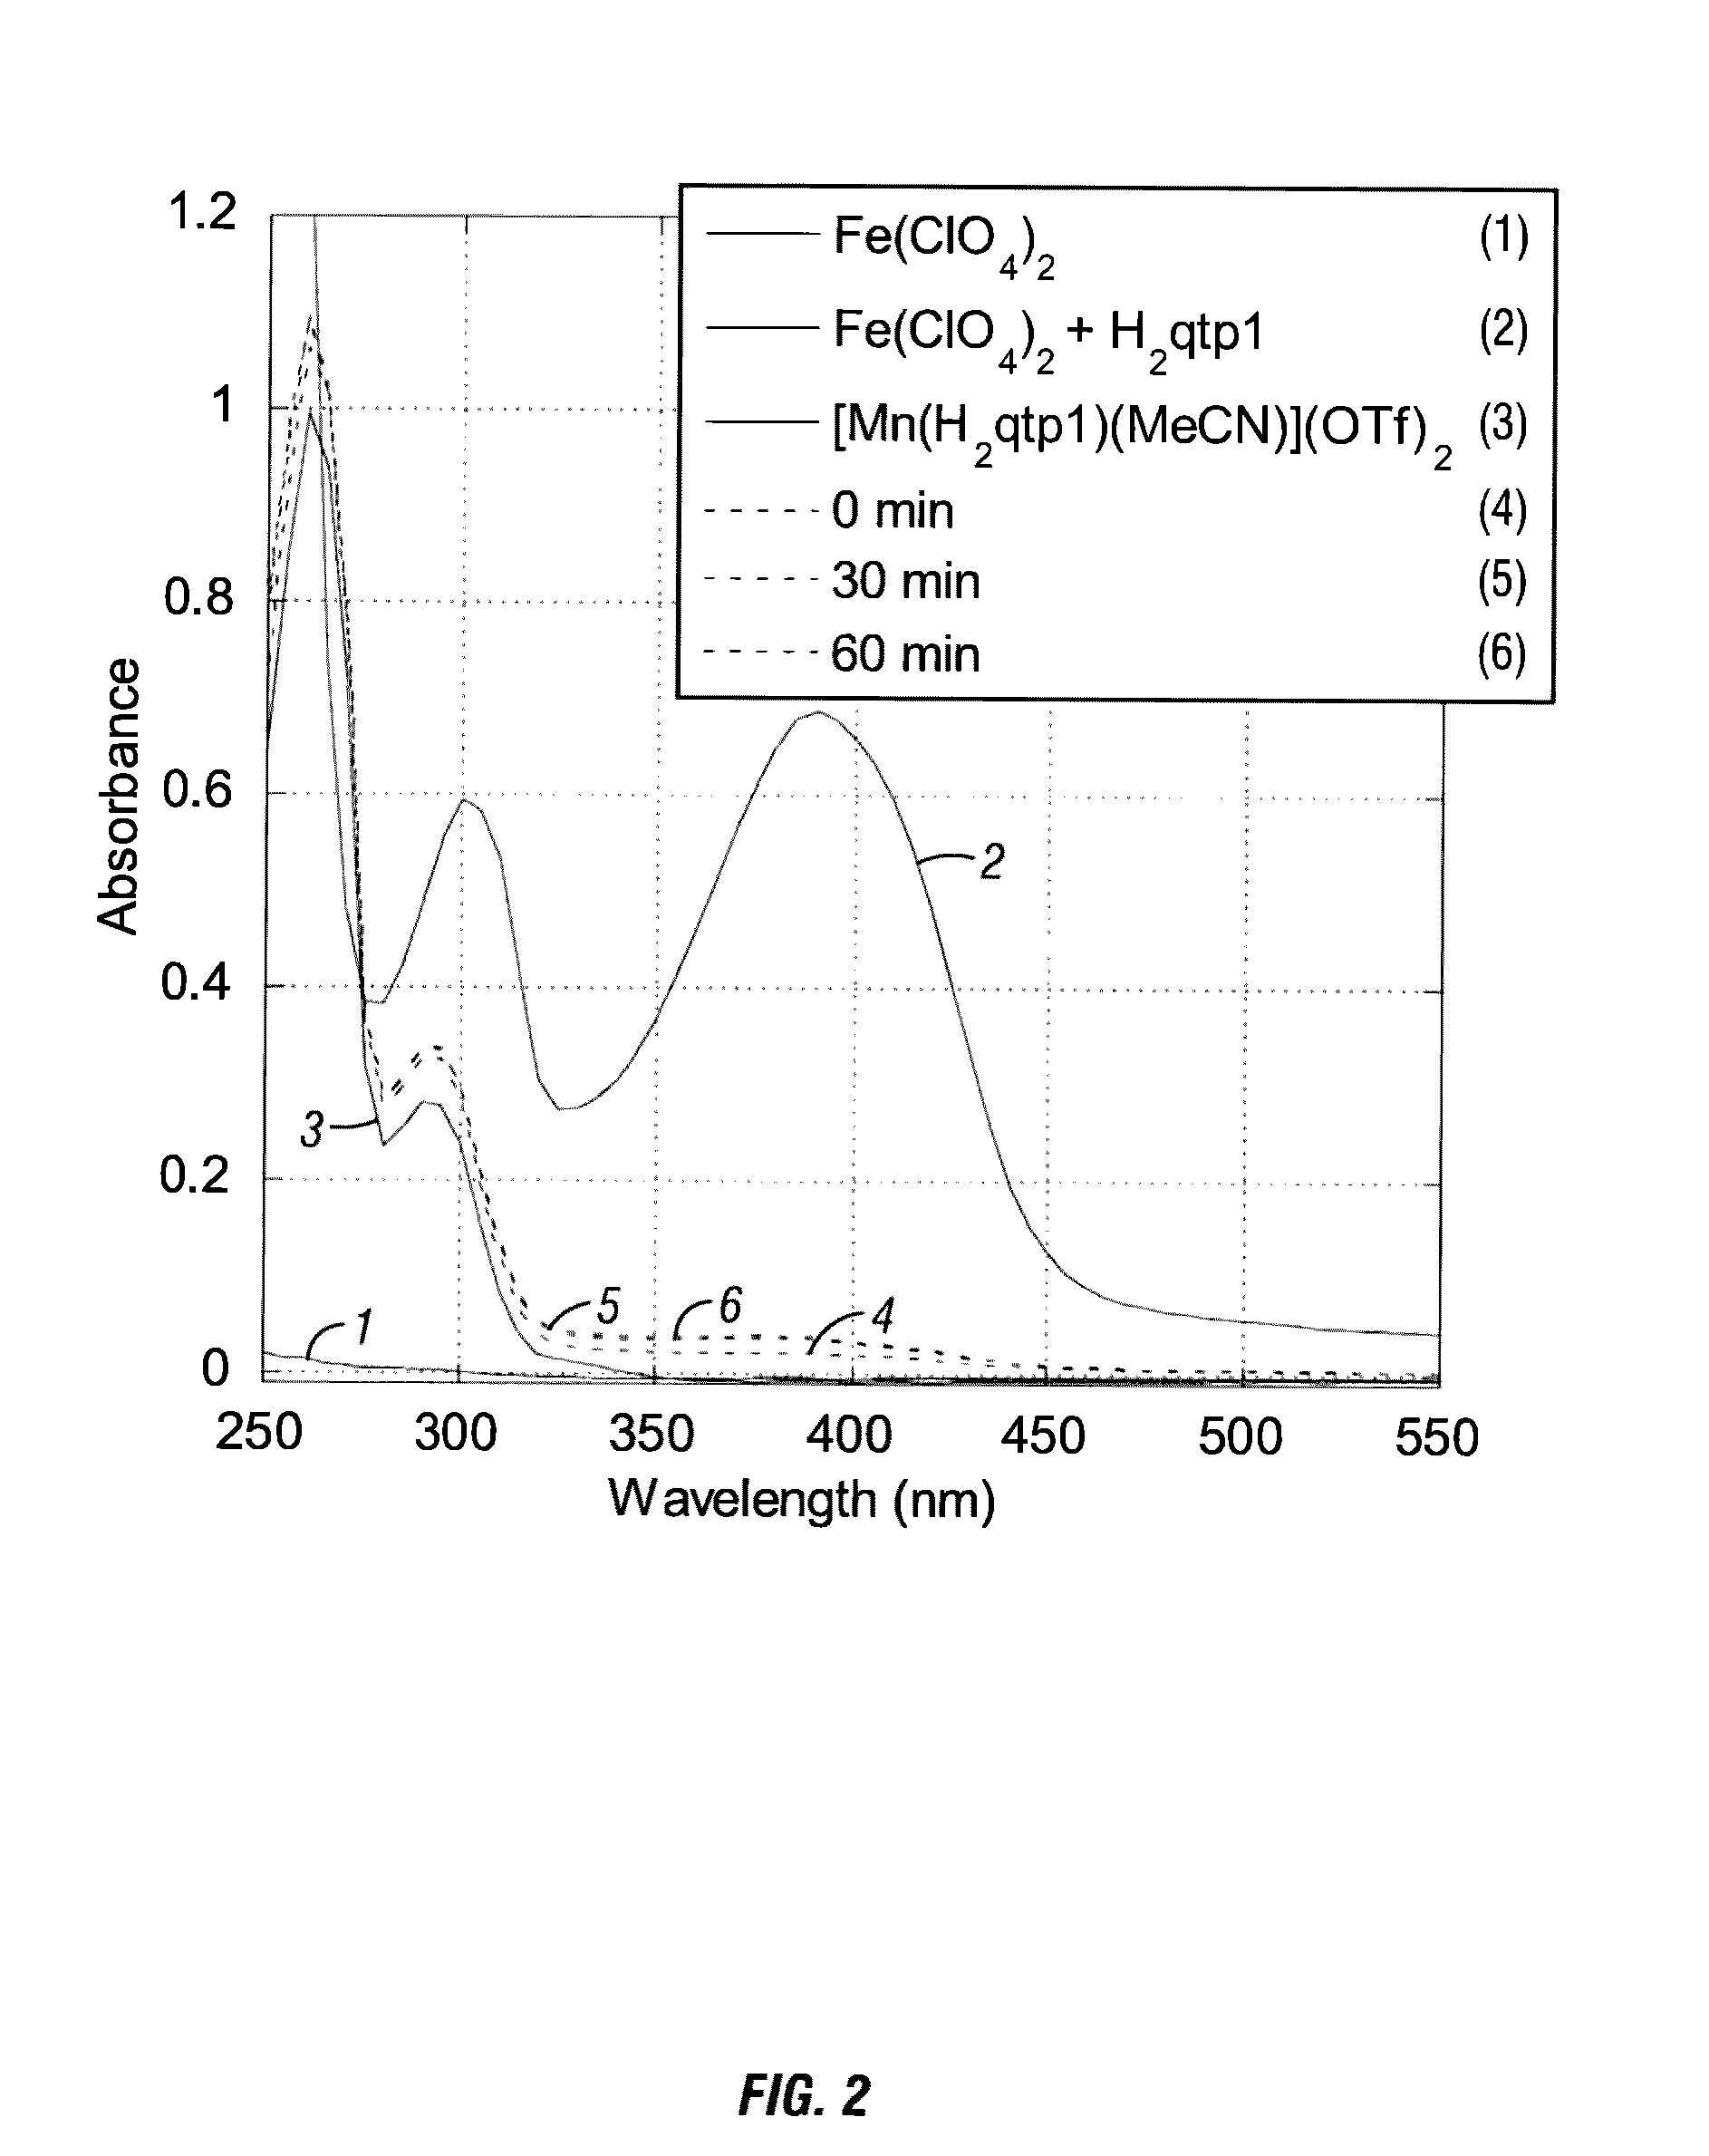 Magnetic resonance imaging contrast agent capable of detecting hydrogen peroxide and reducing reactive oxygen species